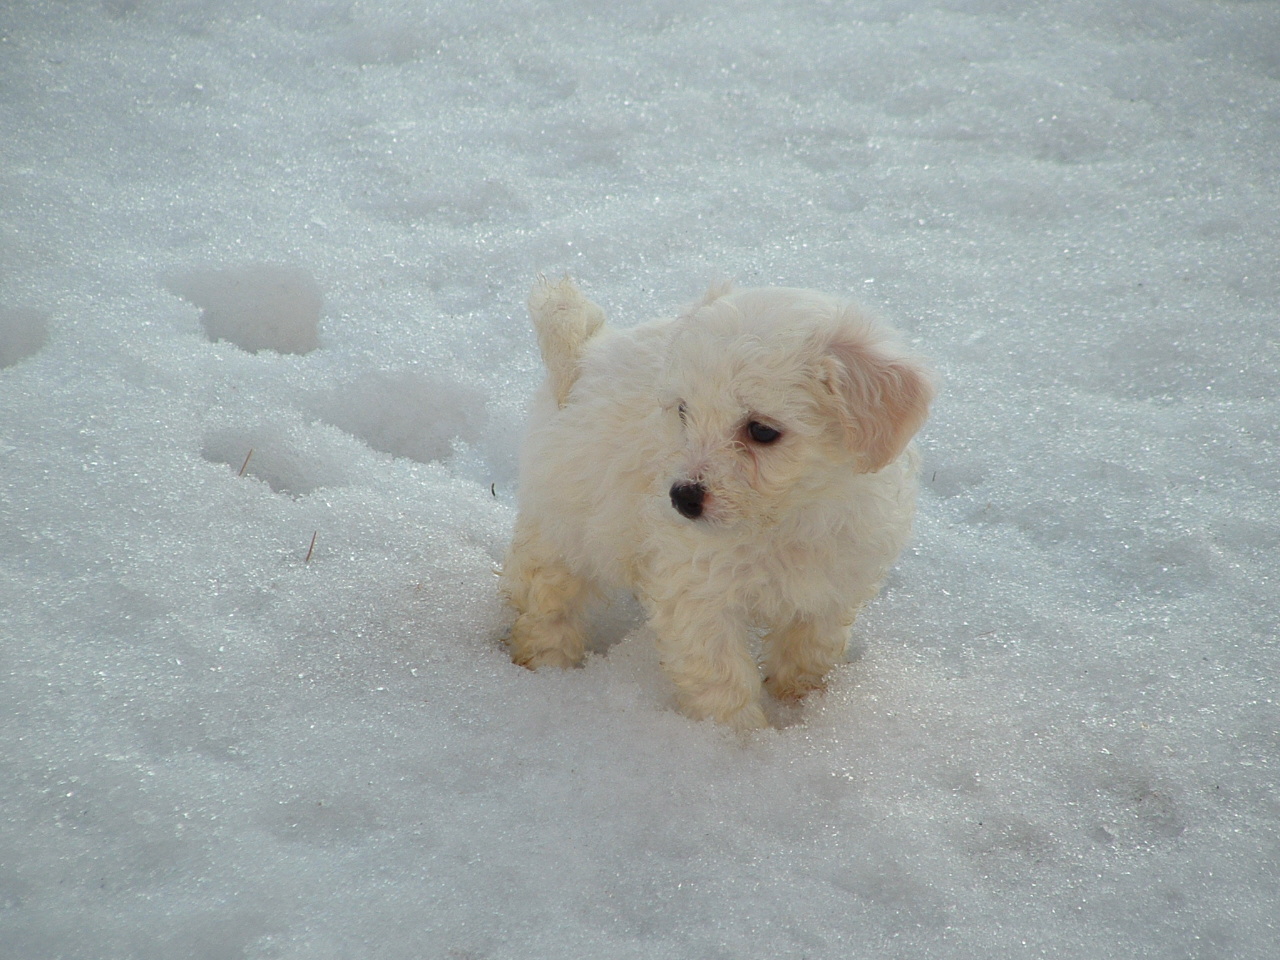 Cute Puppies Playing In Snow - Pictures Of Animals 2016